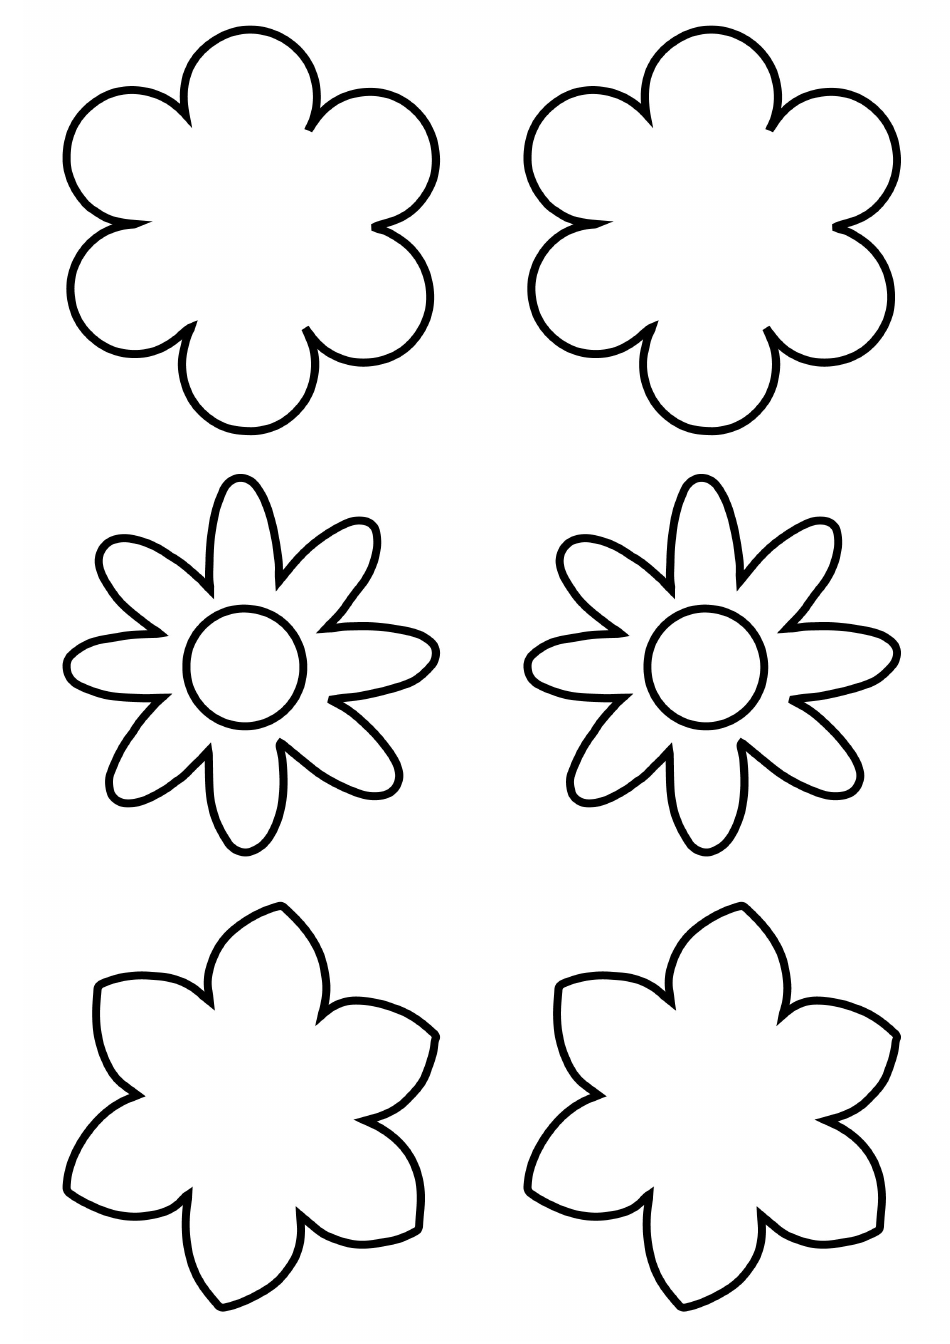 Flower Templates - Different Types, Page 1